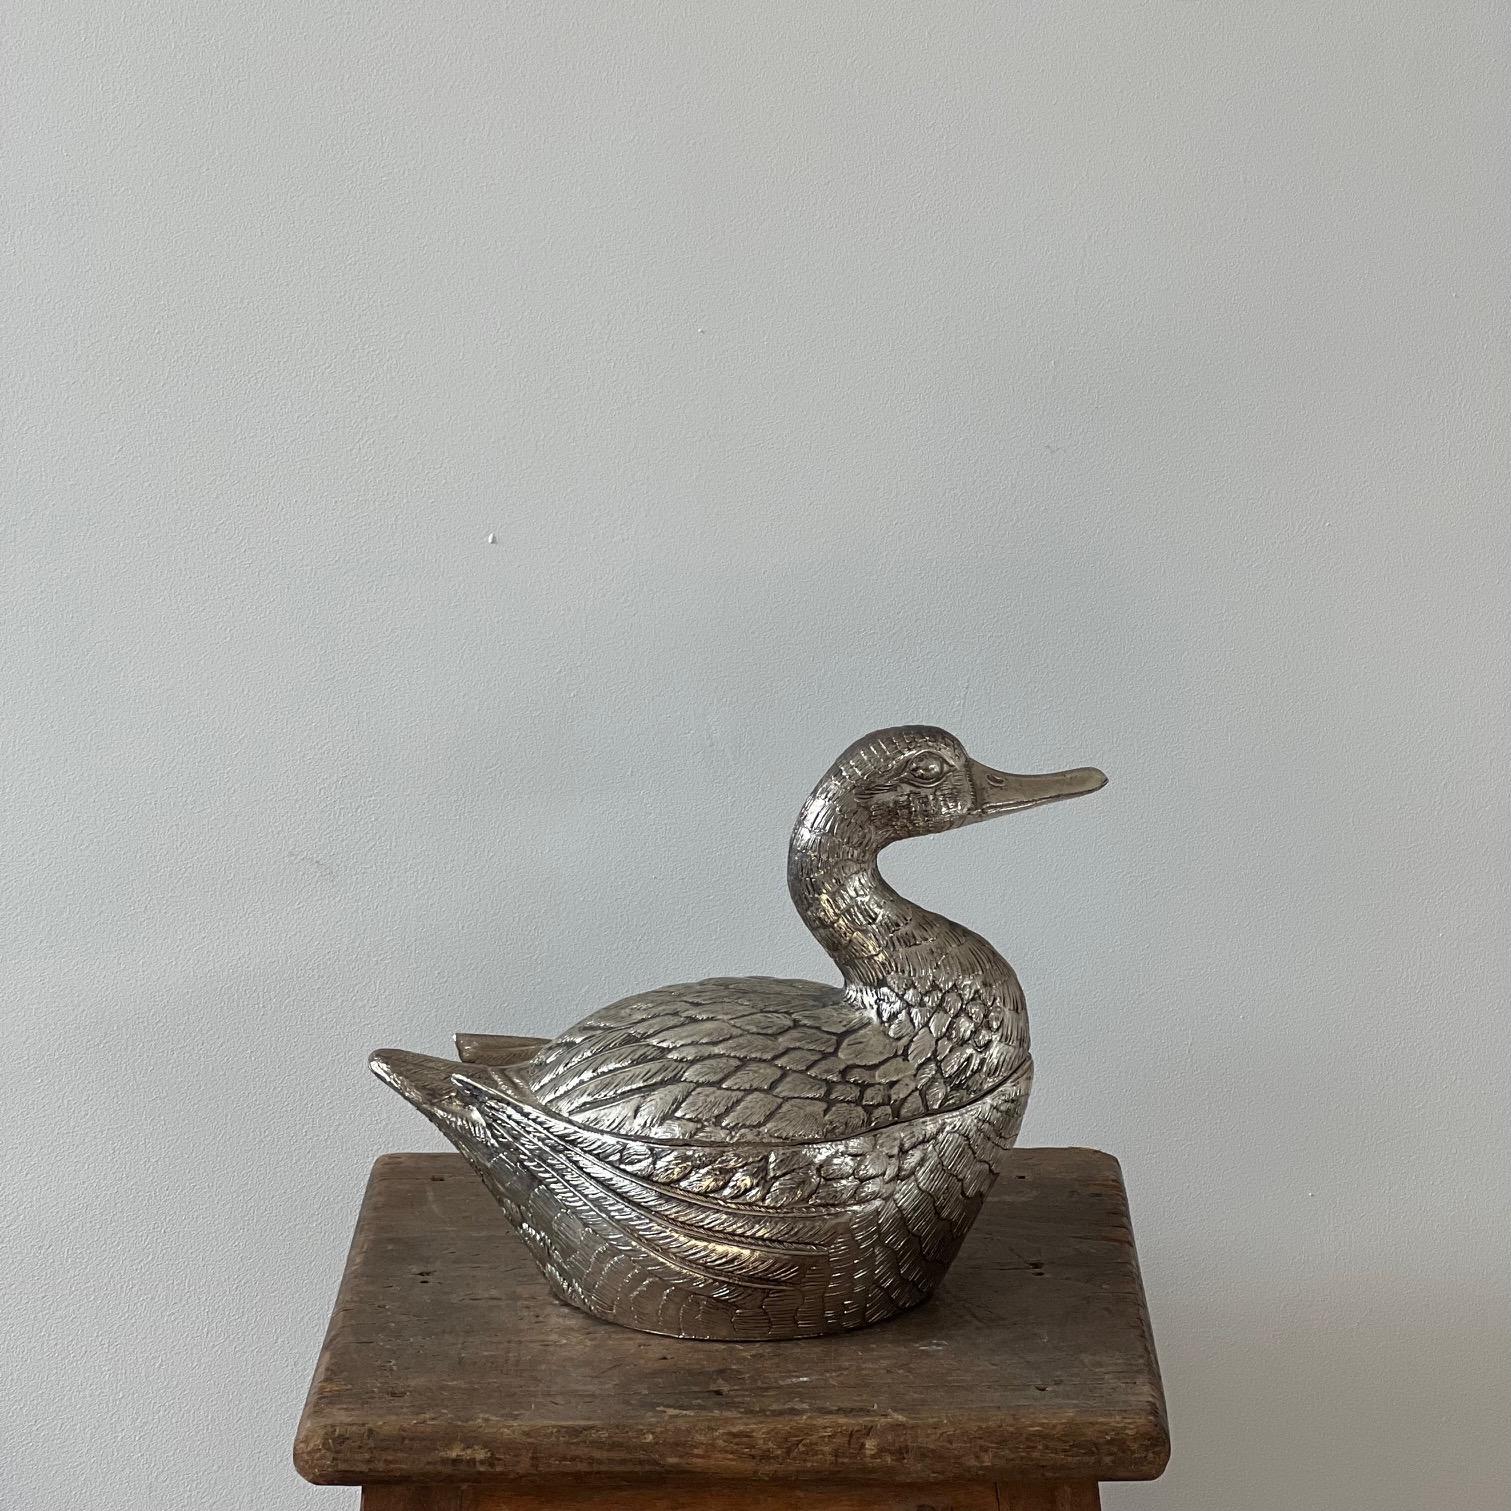 A Mauro Manetti 1960s 'Duck' shaped ice bucket, from Italy. 

c1960s, Italy. 

In good vintage condition retaining it's original liner, but there is evidence of wear commensurate with age. 

Highly decorative and functional, a quirky addition